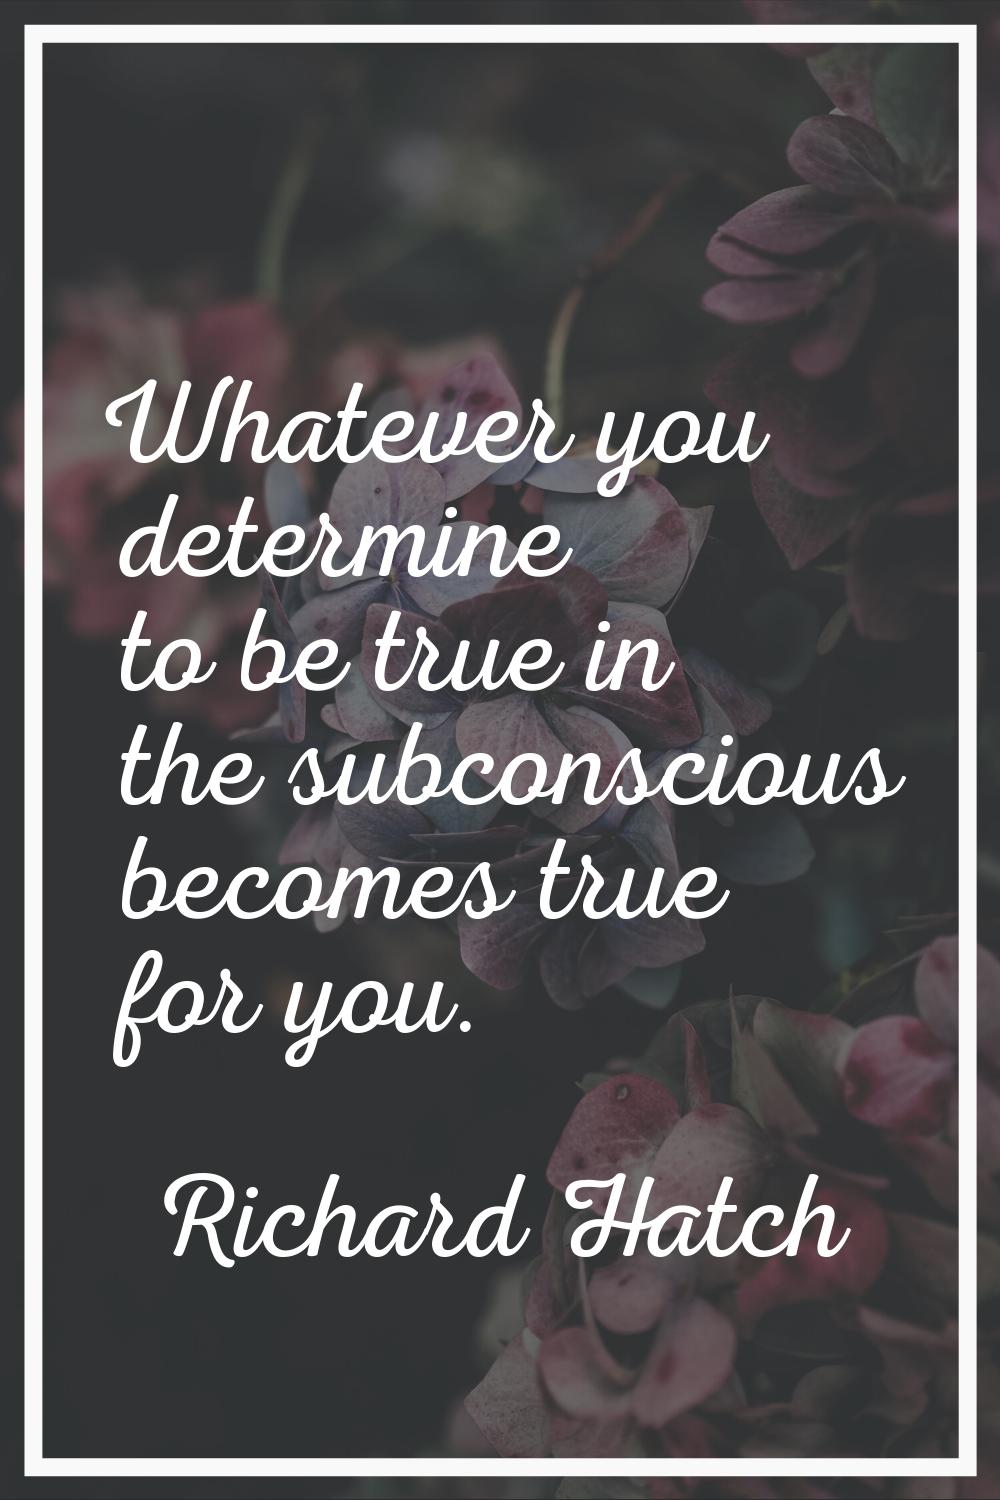 Whatever you determine to be true in the subconscious becomes true for you.